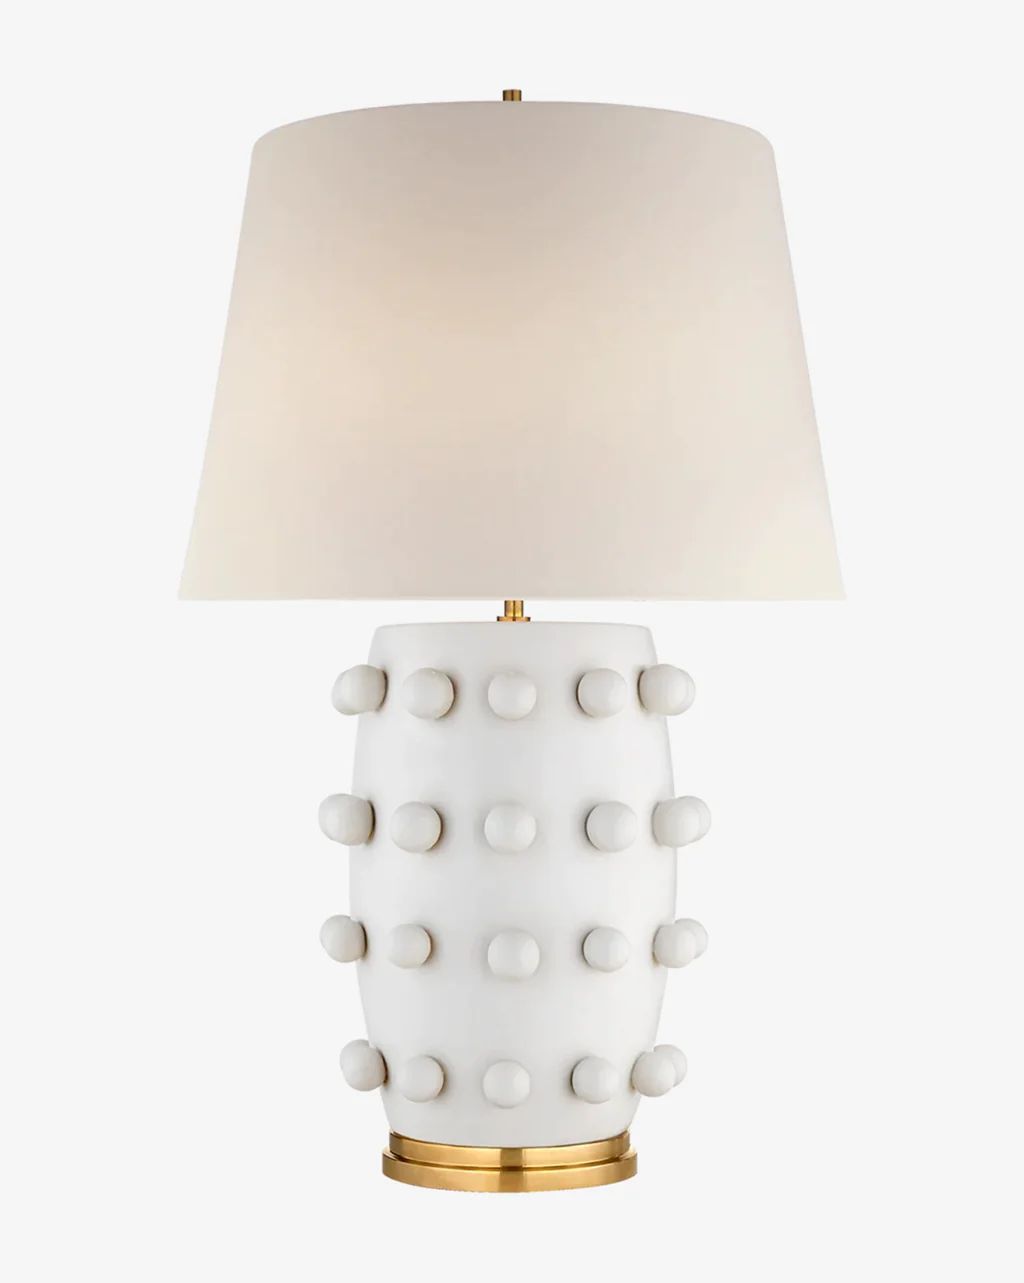 Linden Table Lamp | McGee & Co.